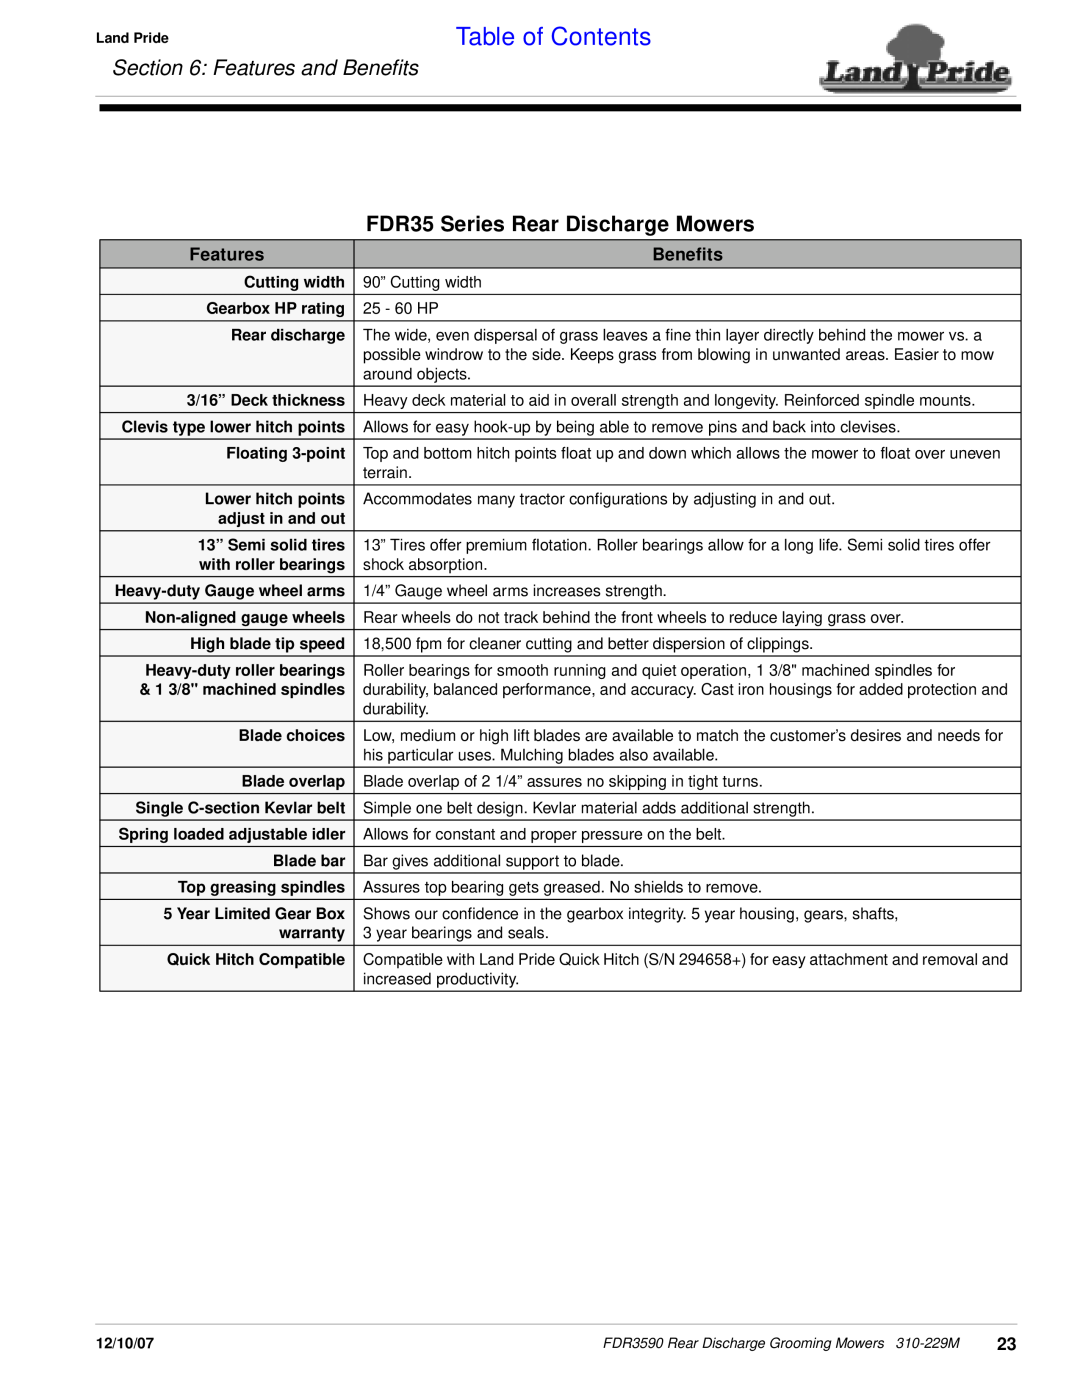 Land Pride FDR3590 manual Features and Beneﬁts, FDR35 Series Rear Discharge Mowers, Table of Contents 